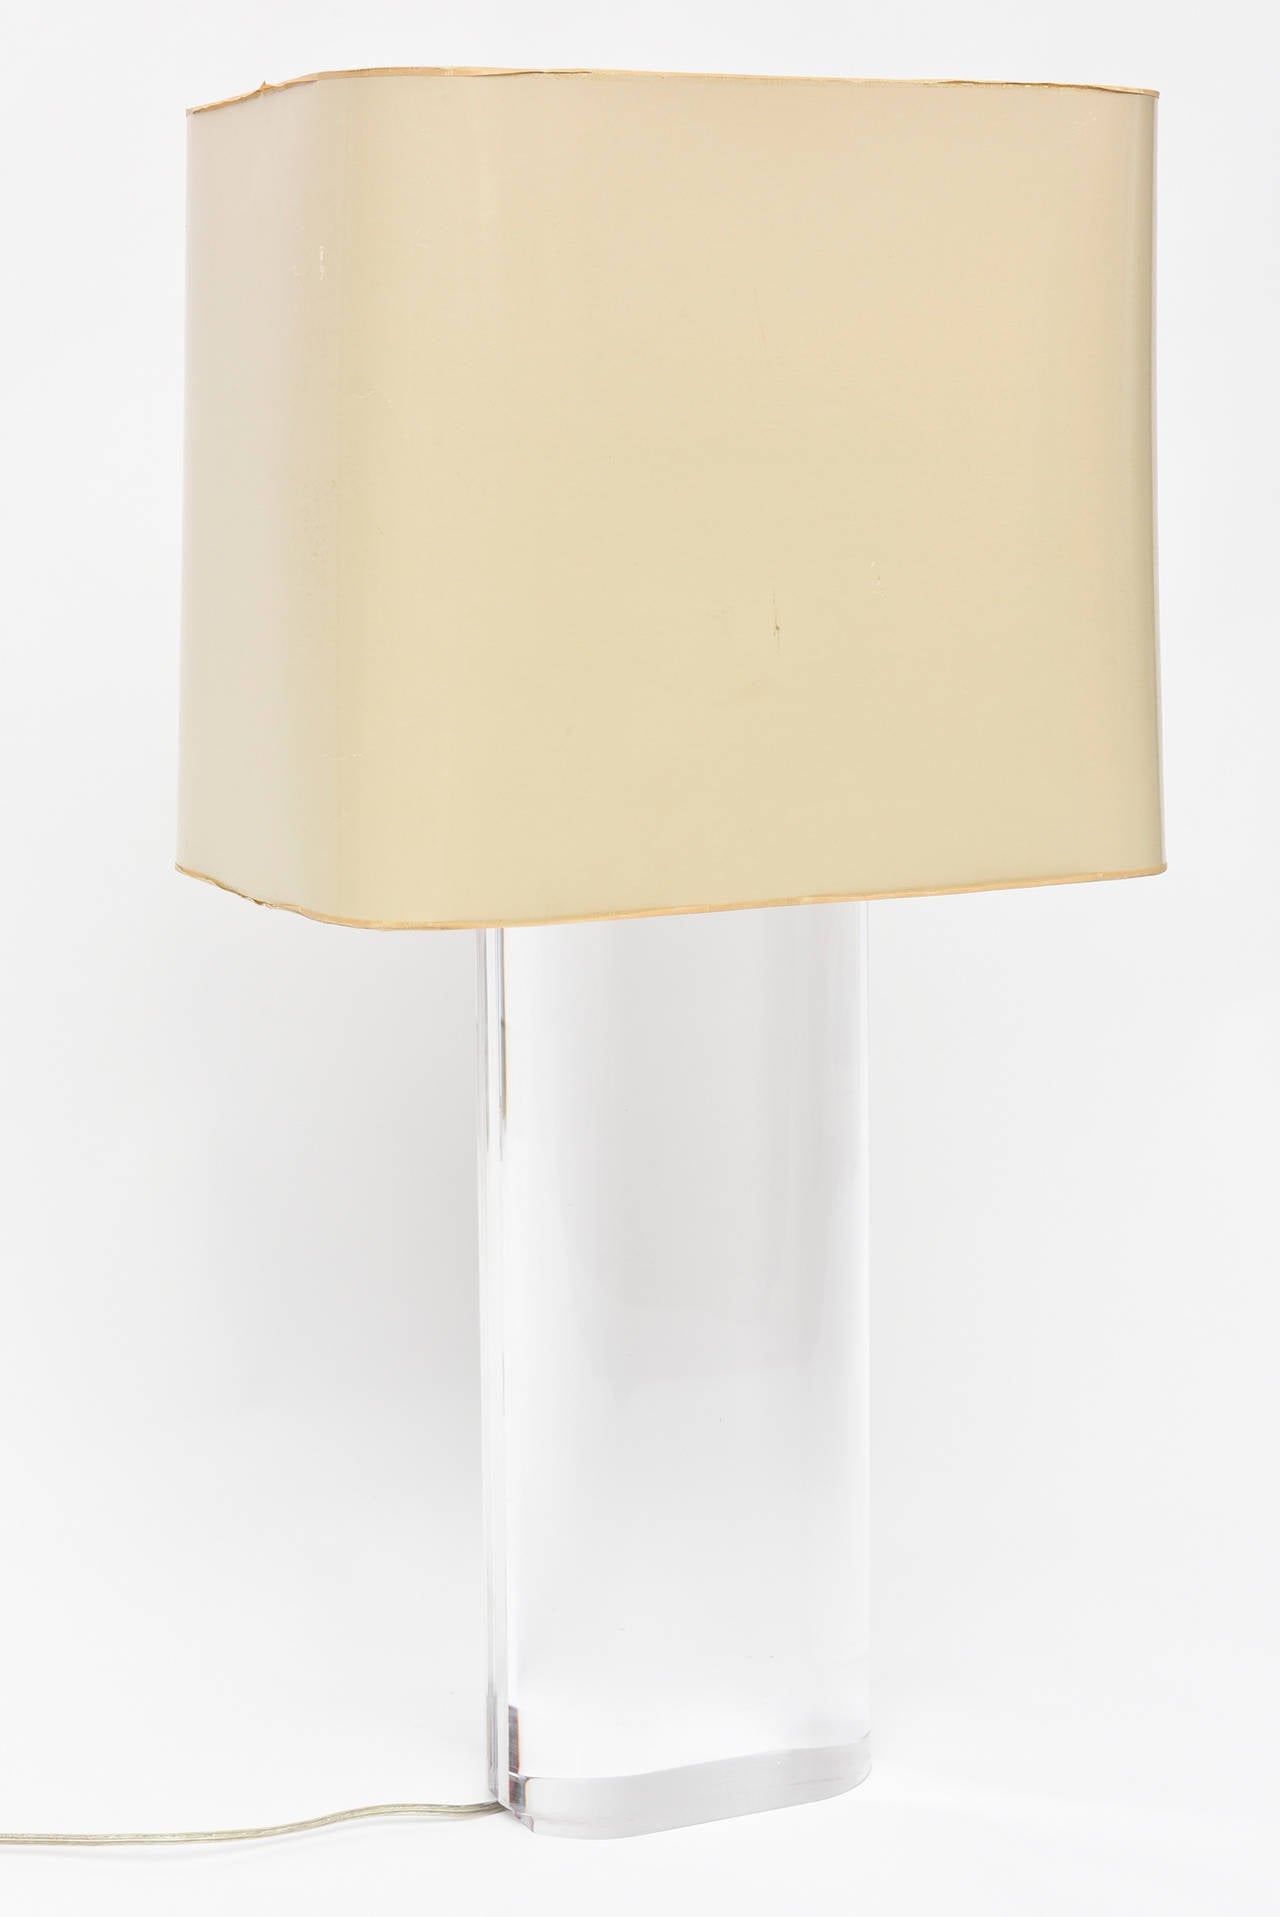 A Classic lamp by Karl Springer.